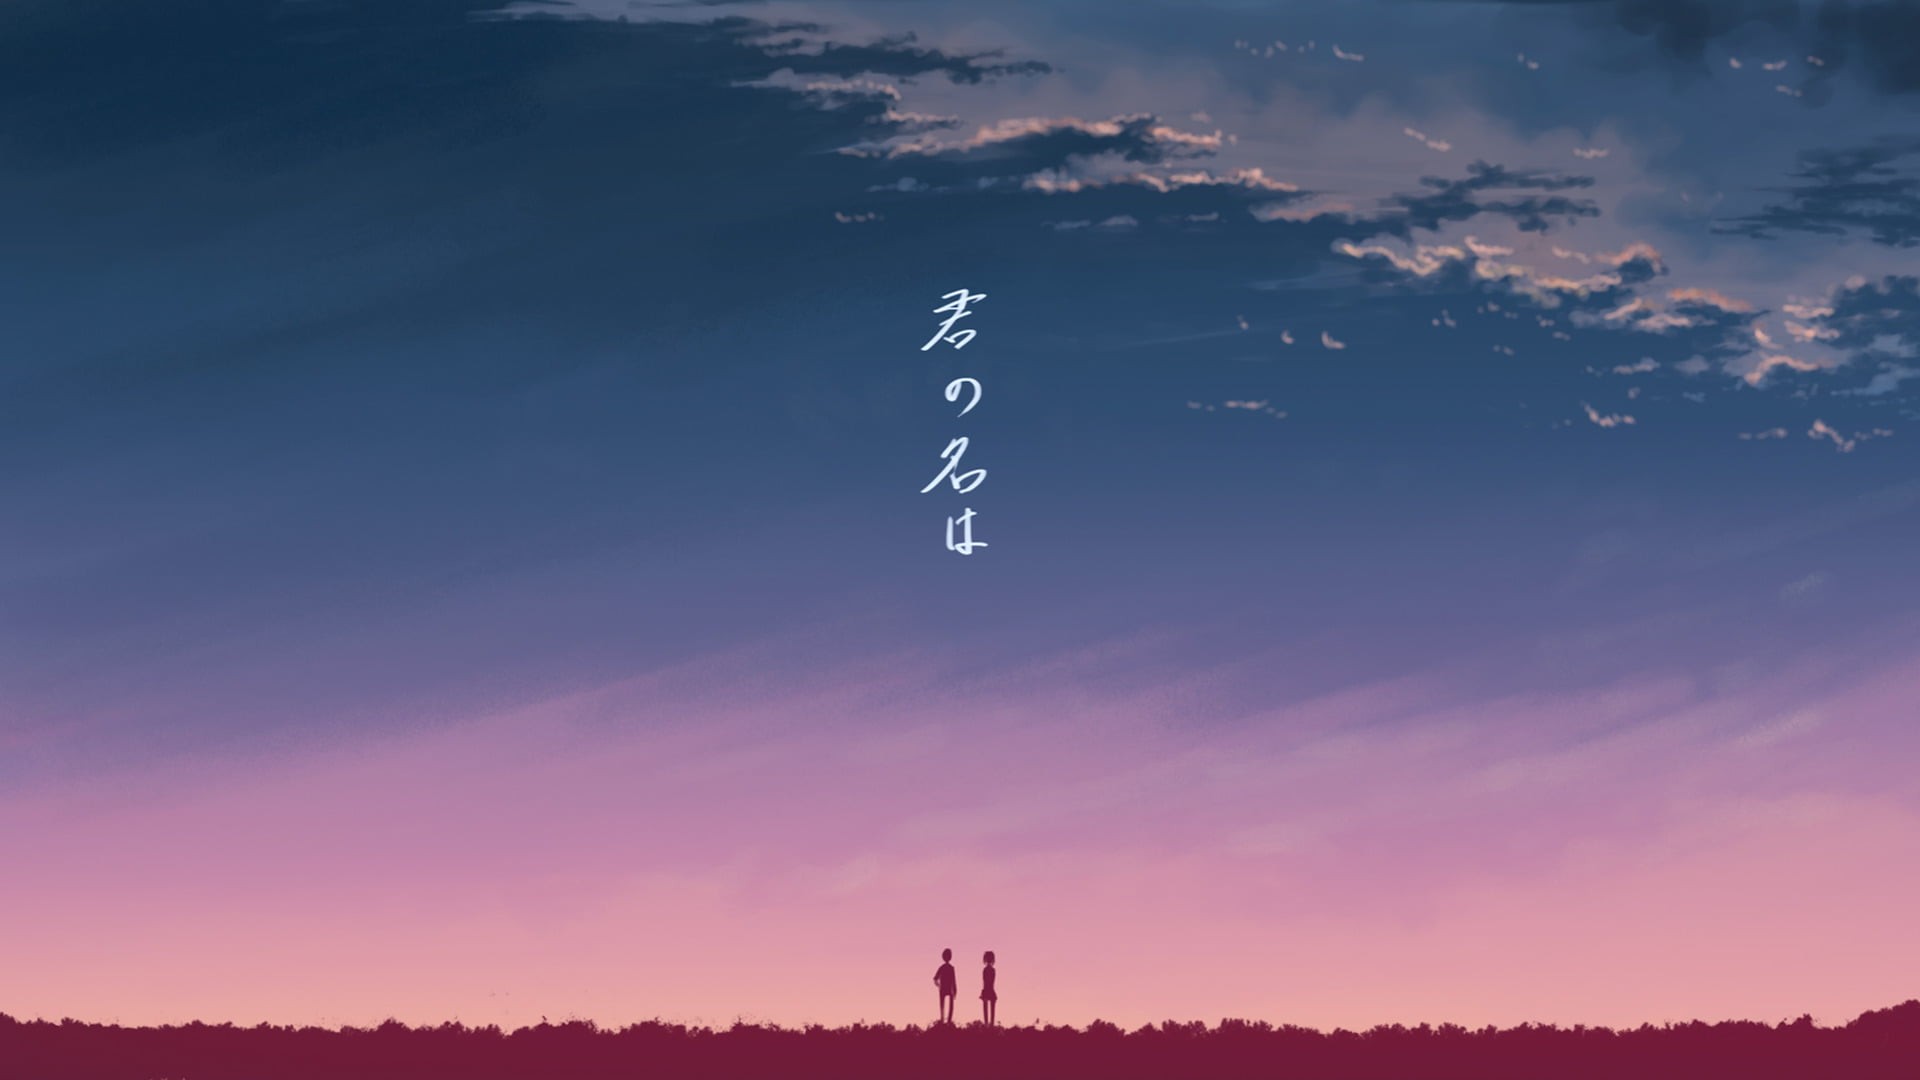 Your Name 4k Wallpaper 1920x1080 1